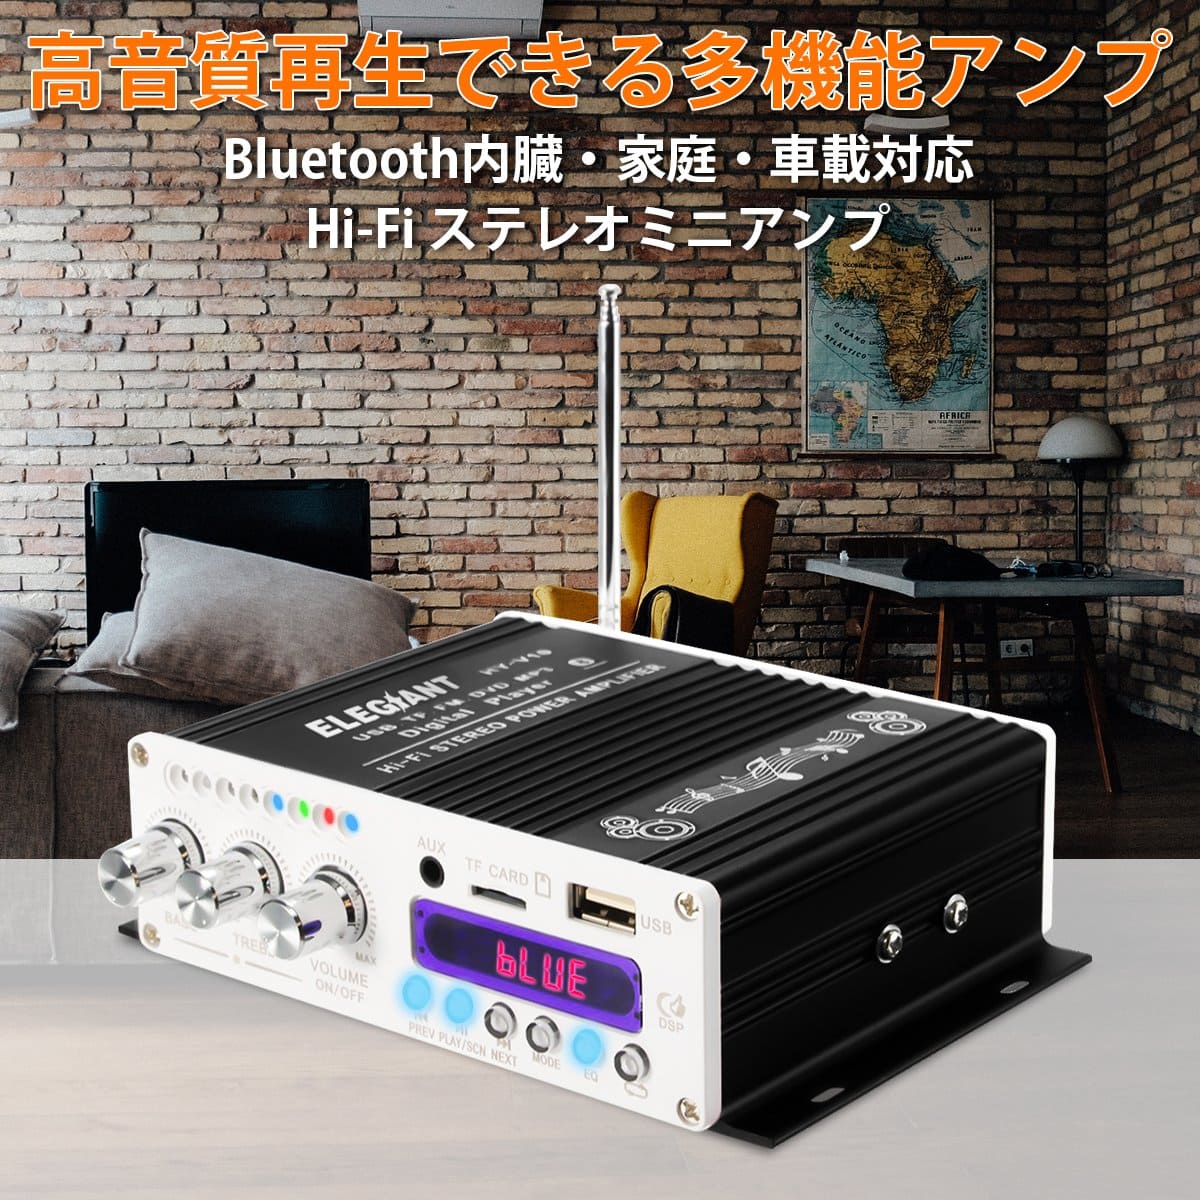 New]With ELEGIANT Bluetooth small size Amplifier power amp Bluetooth stereo  Audio Amplifier Audio Amplifier Hi-Fi USB SD card small Mini size car home  vehicle installation motorcycle MP3 12v Japanese instruction manual for